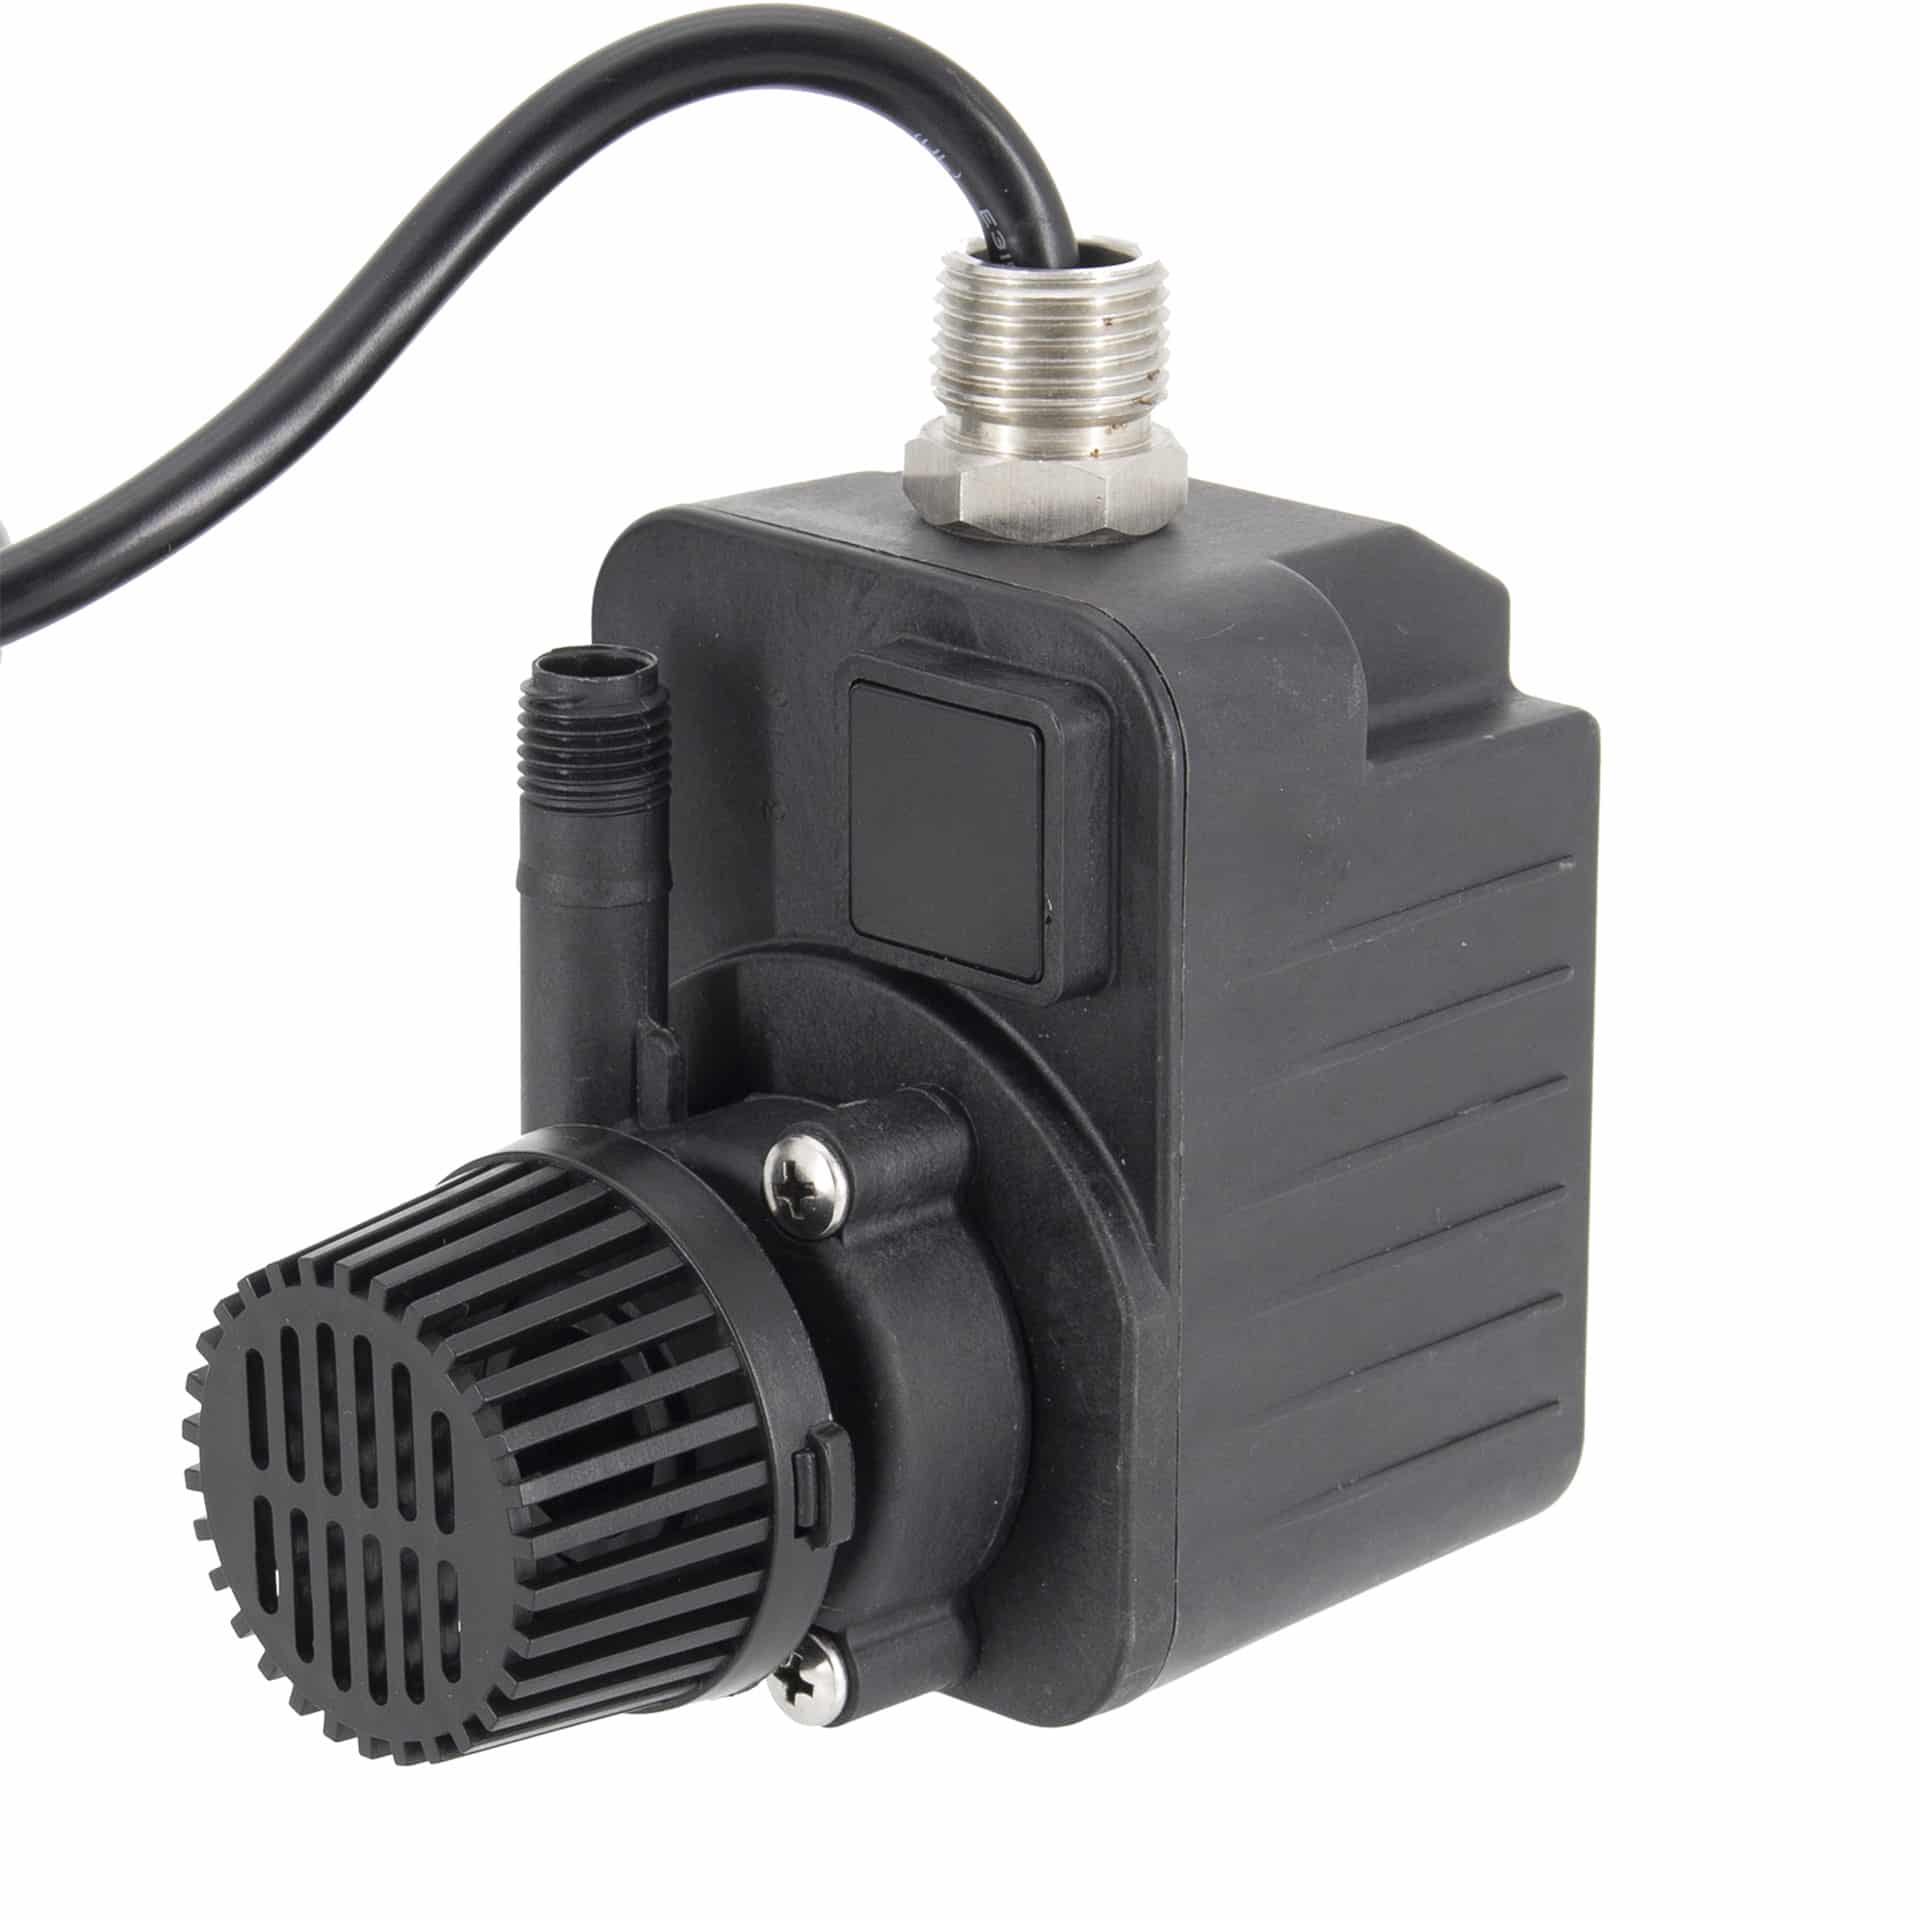 GP210C – Submersible Parts Washer Pump, 230V, 190 GPH, 6 Ft Power Cord